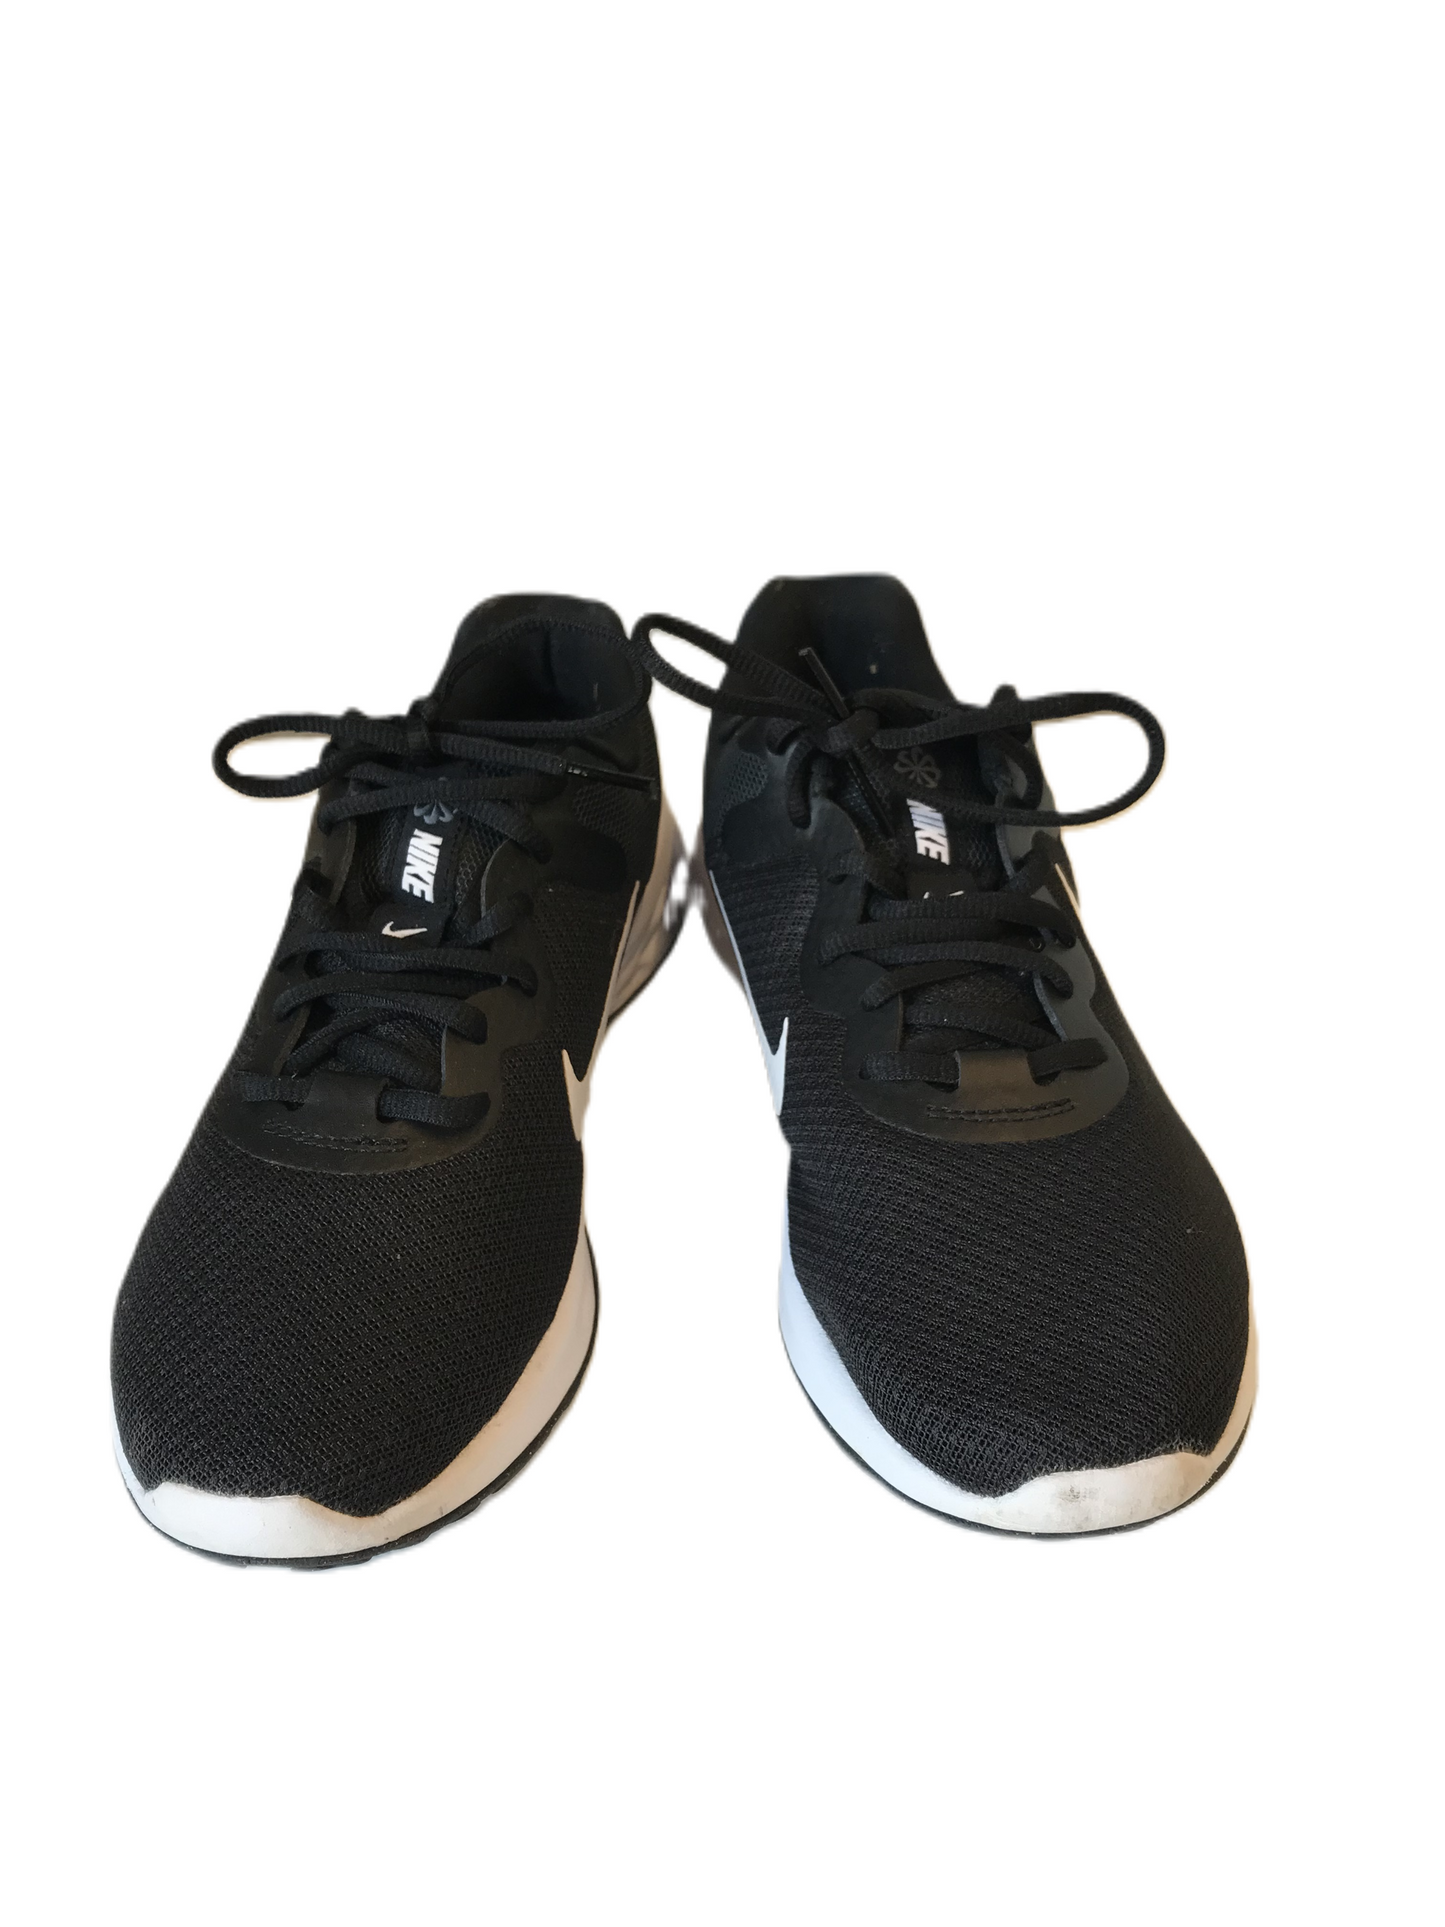 Black Shoes Athletic By Nike, Size: 8.5